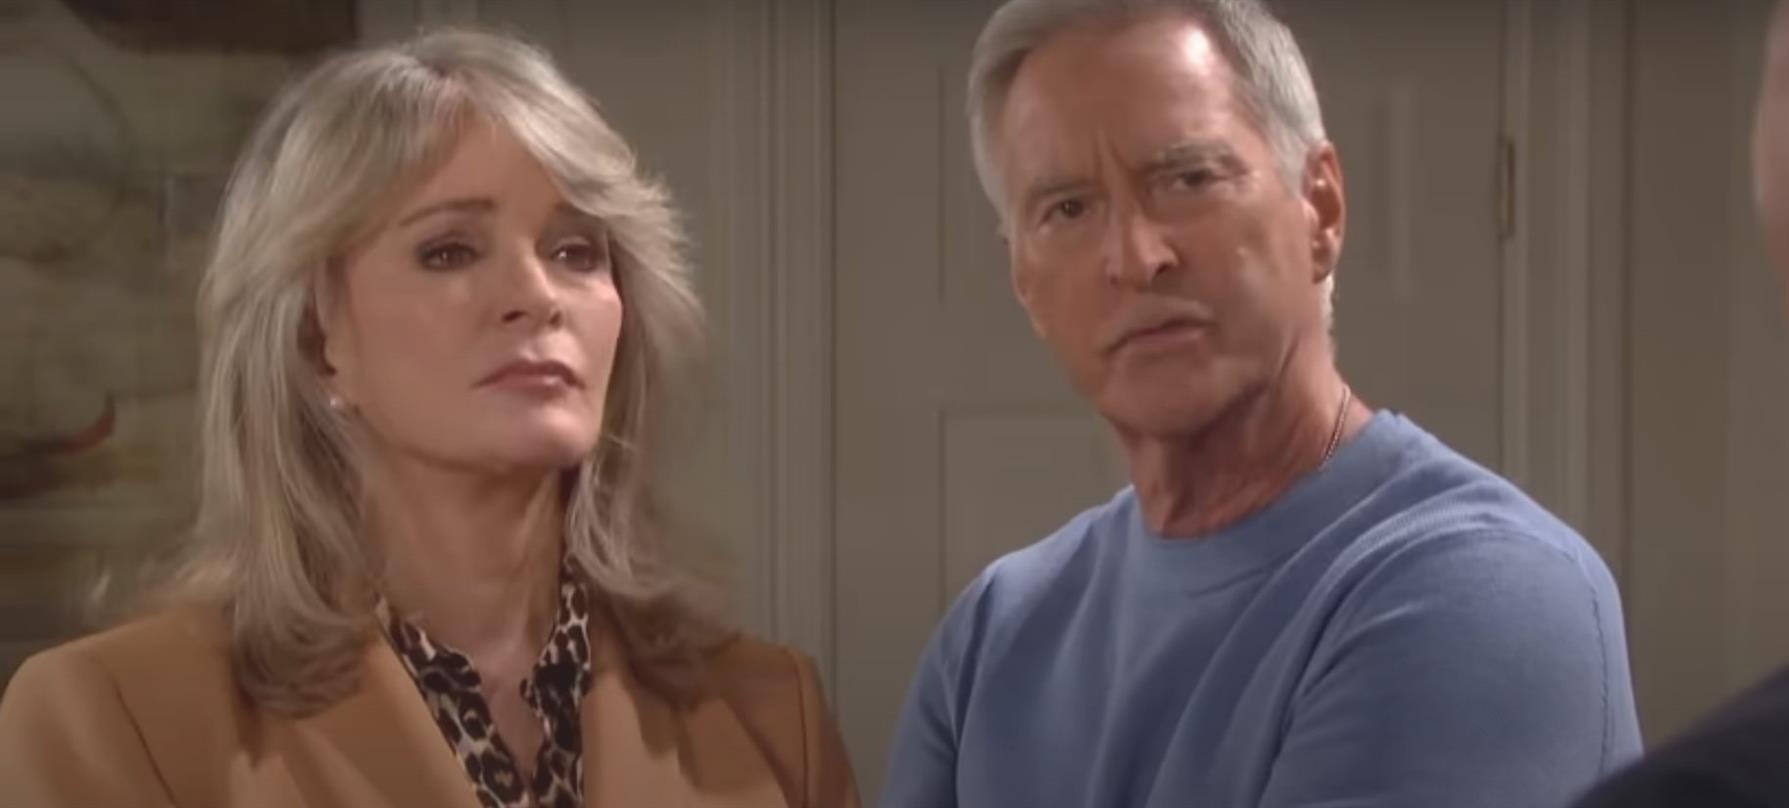 Days of Our Lives Beyond Salem Episode 1 A quoi sattendre Hmst9DYEw 1 1